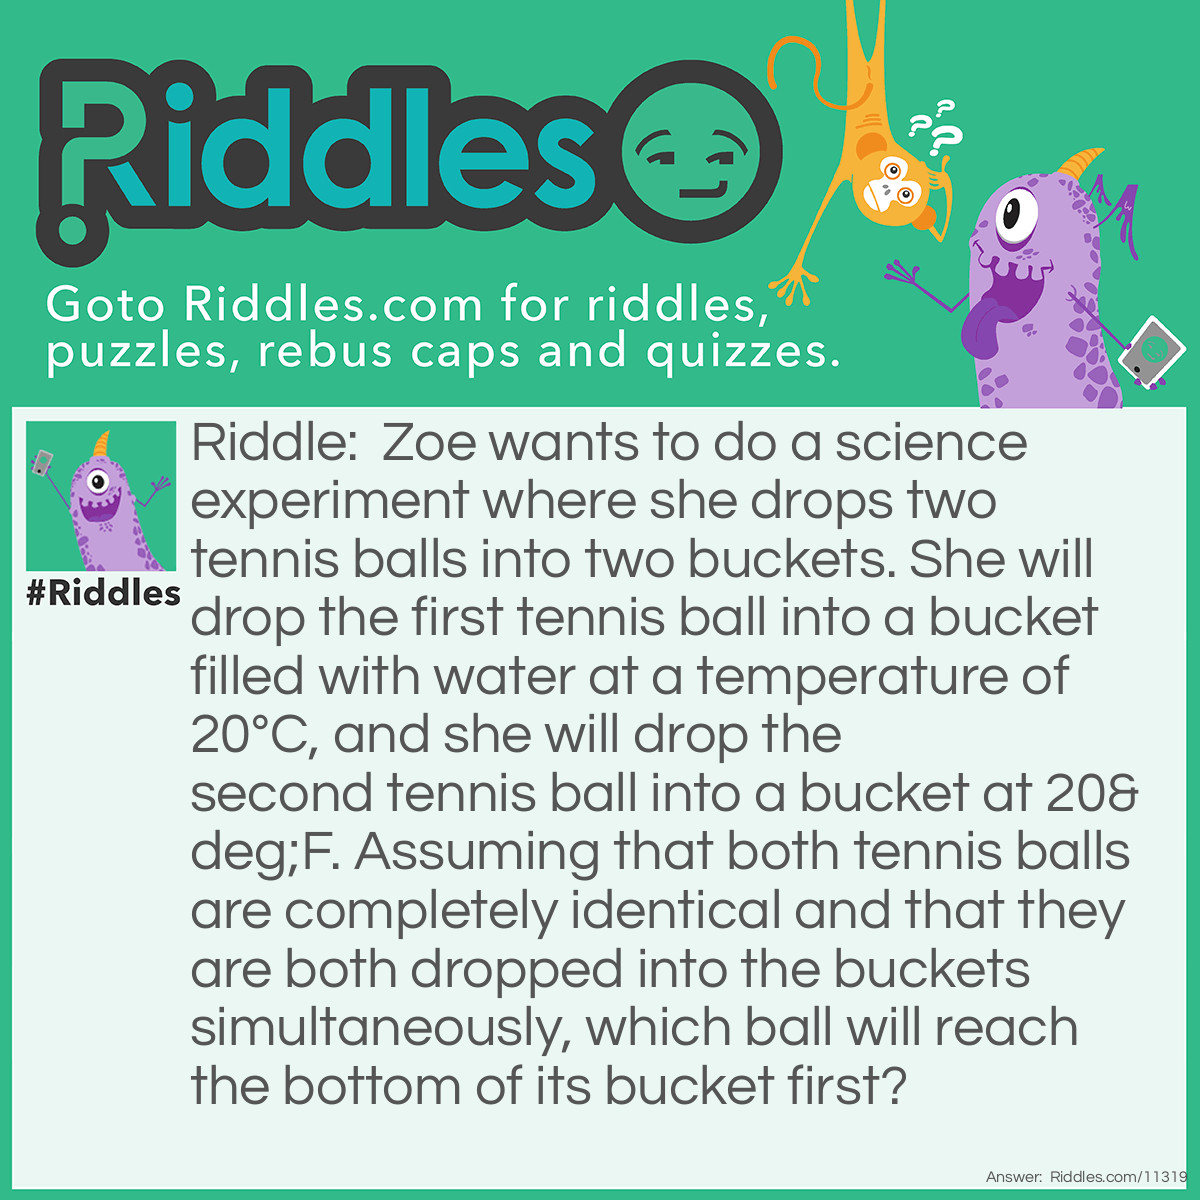 Riddle: Zoe wants to do a science experiment where she drops two tennis balls into two buckets. She will drop the first tennis ball into a bucket filled with water at a temperature of 20°C, and she will drop the second tennis ball into a bucket at 20°F. Assuming that both tennis balls are completely identical and that they are both dropped into the buckets simultaneously, which ball will reach the bottom of its bucket first? Answer: The tennis ball dropped into the second bucket will reach the bottom first. The water in the first bucket will slow down the first tennis ball, and thus, it will take longer for that ball to reach the bottom of the bucket. Did you think the "water" in the second bucket had to be frozen at 20°F? Well, I didn't say that there was water in the second bucket–the bucket ITSELF was at 20°F. Therefore, there is no water or ice to slow the first tennis ball down.